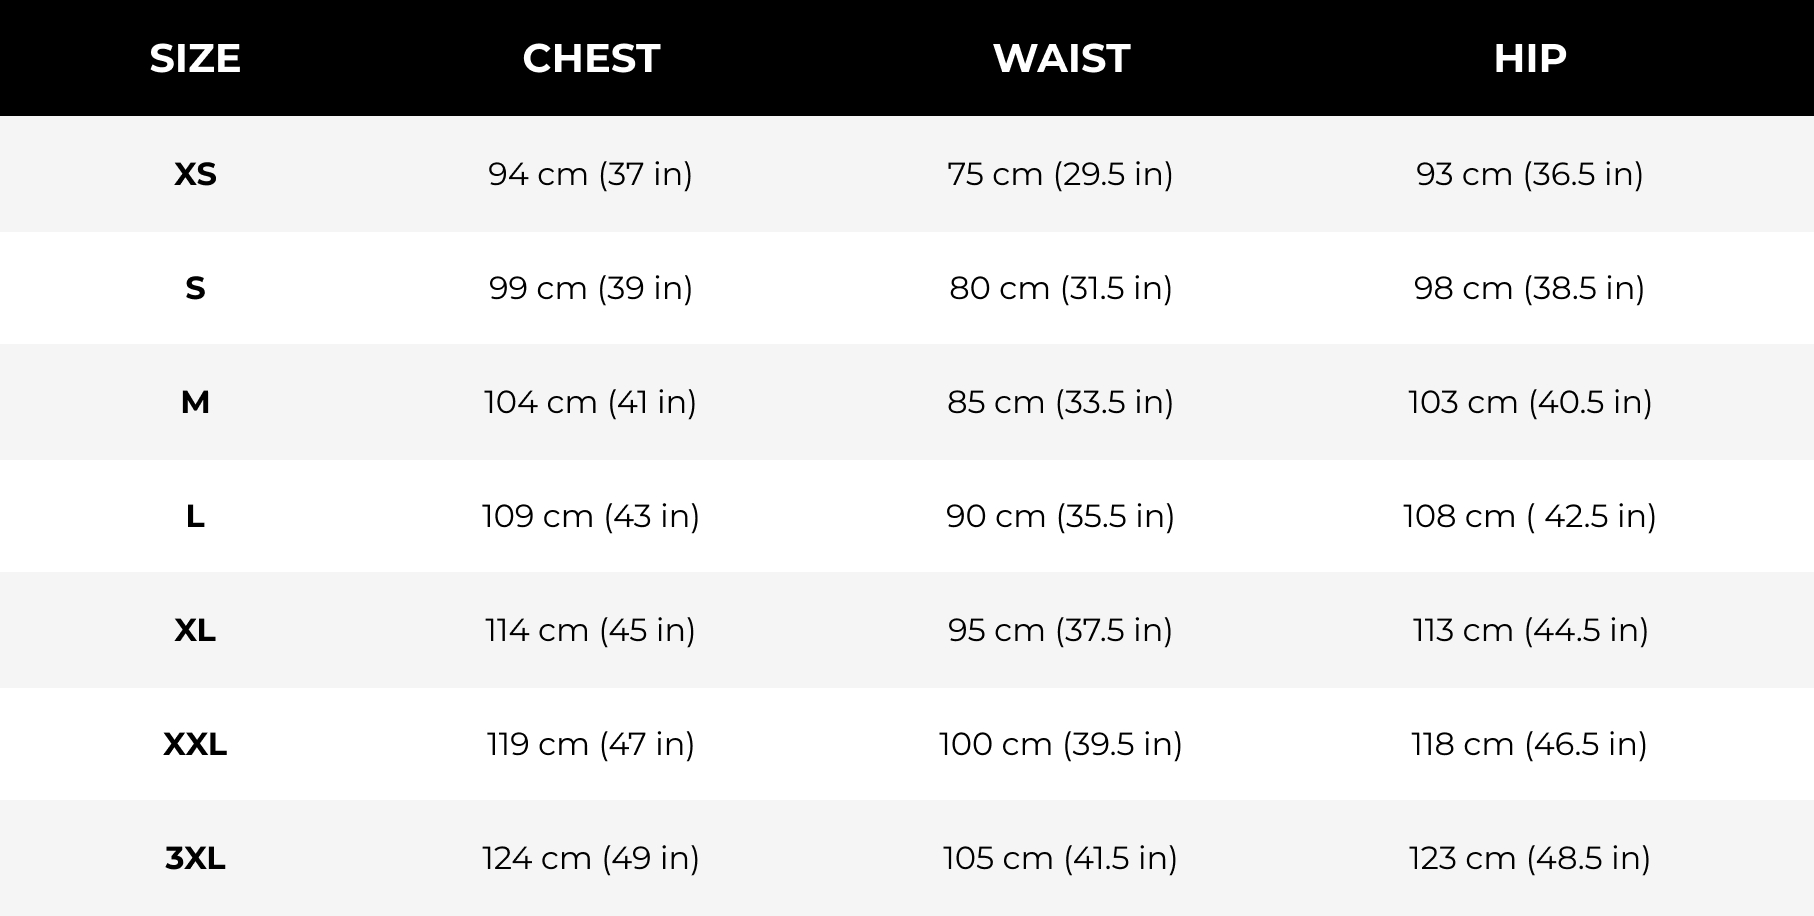 Men's shoe size chart  See our US size guide for men